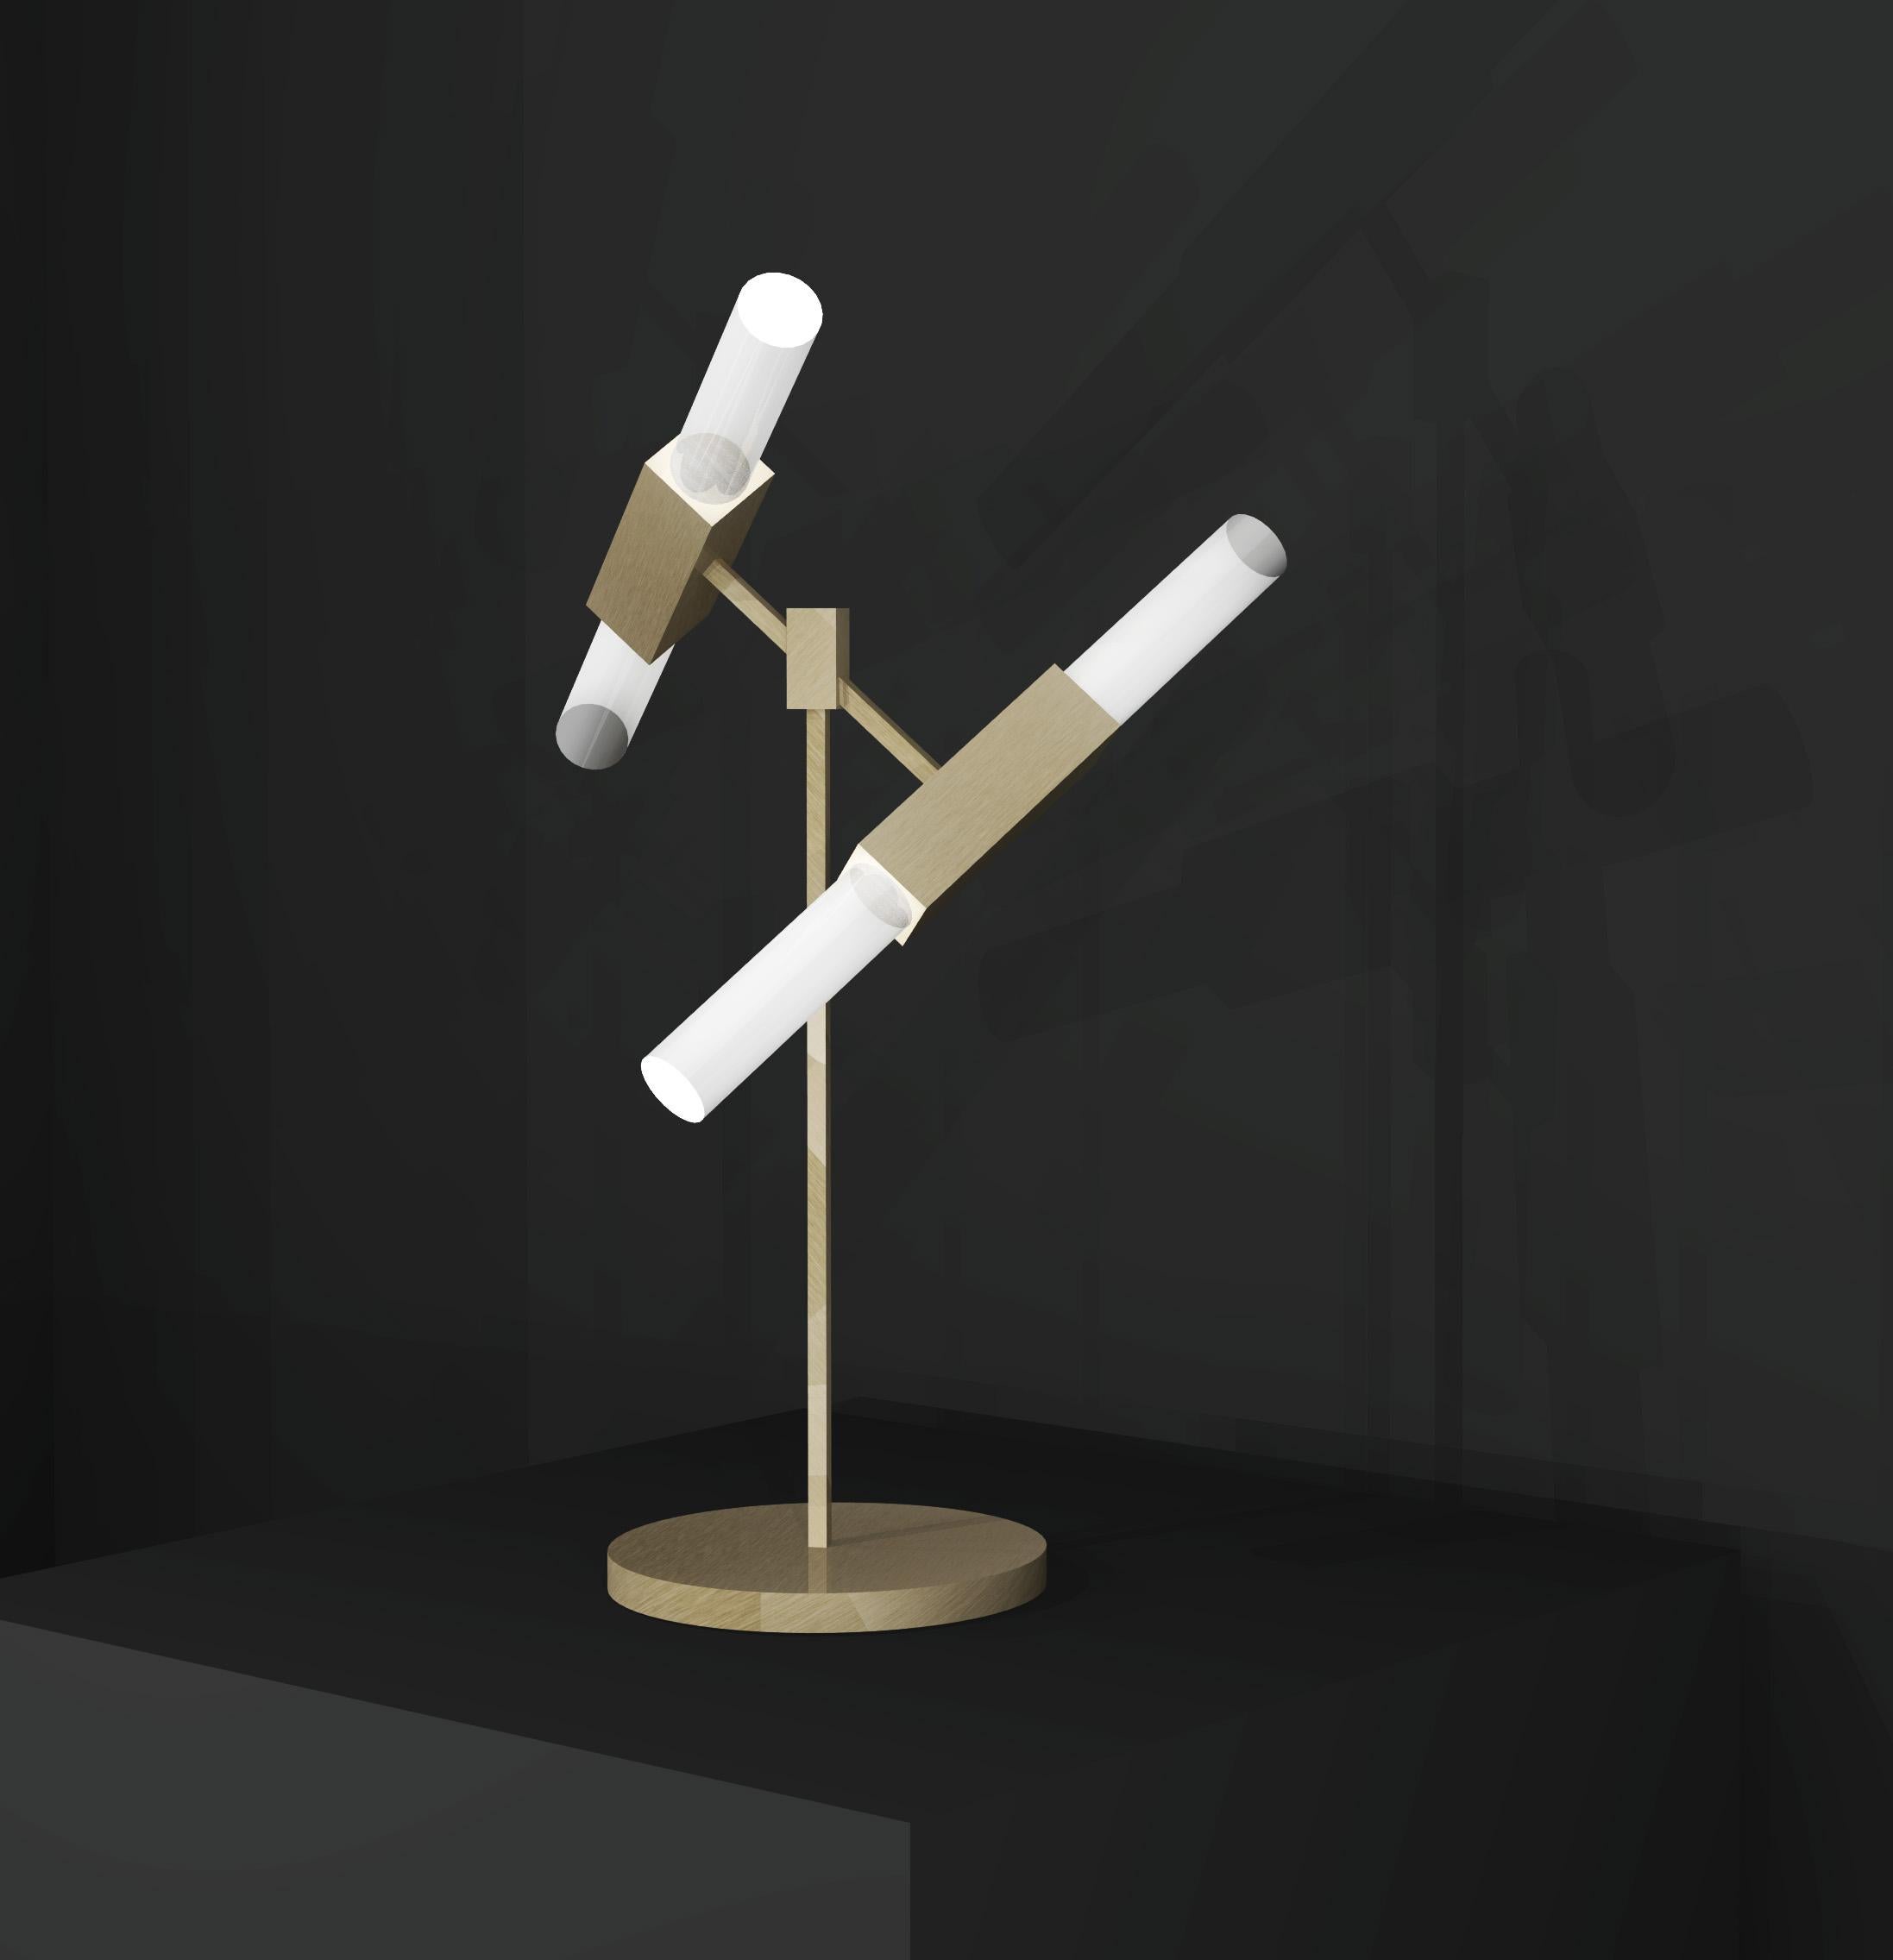 This table lamp is part of a range that was originally designed as bathroom lights and developed into a full collection, created to achieve a timeless design. Using high quality materials including fine brass and glass, a striking, sleek design